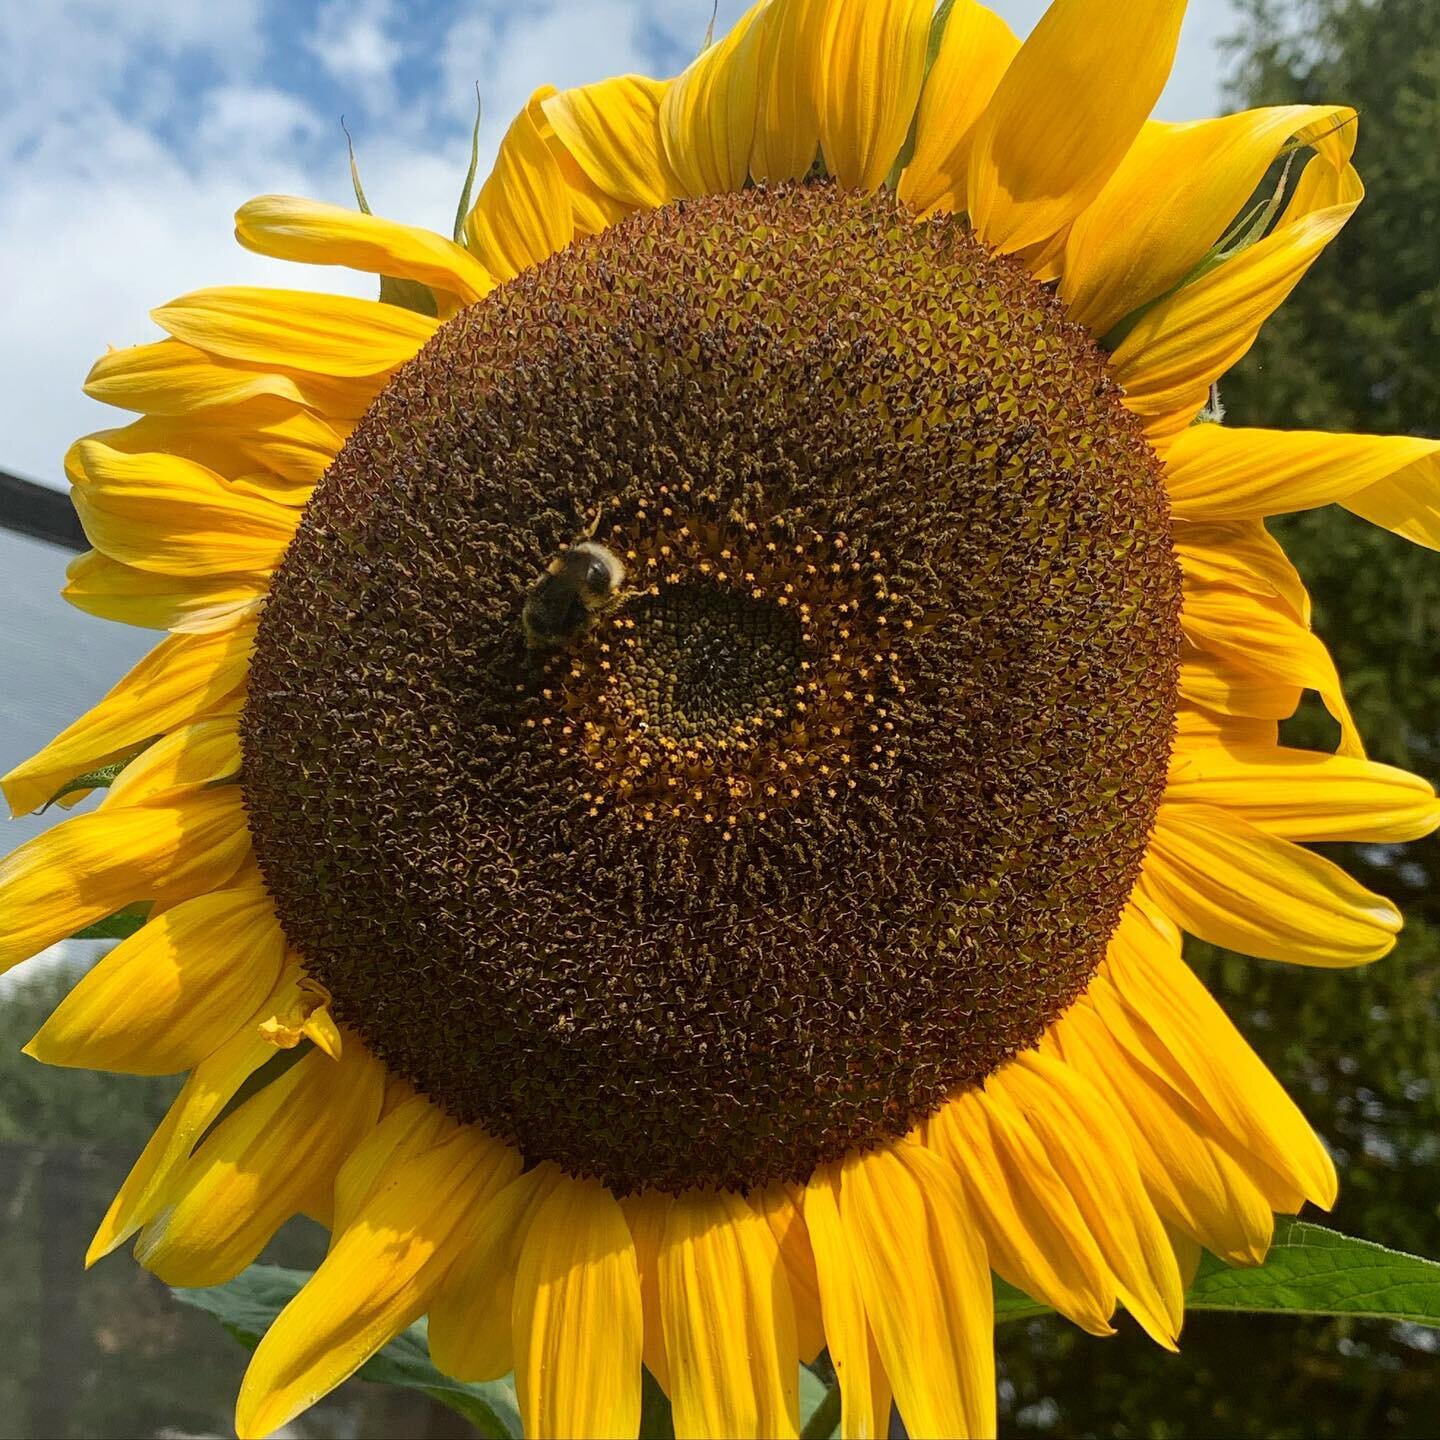 #sunflower never known one so big. That tiny creature is a massive bumble bee on it.